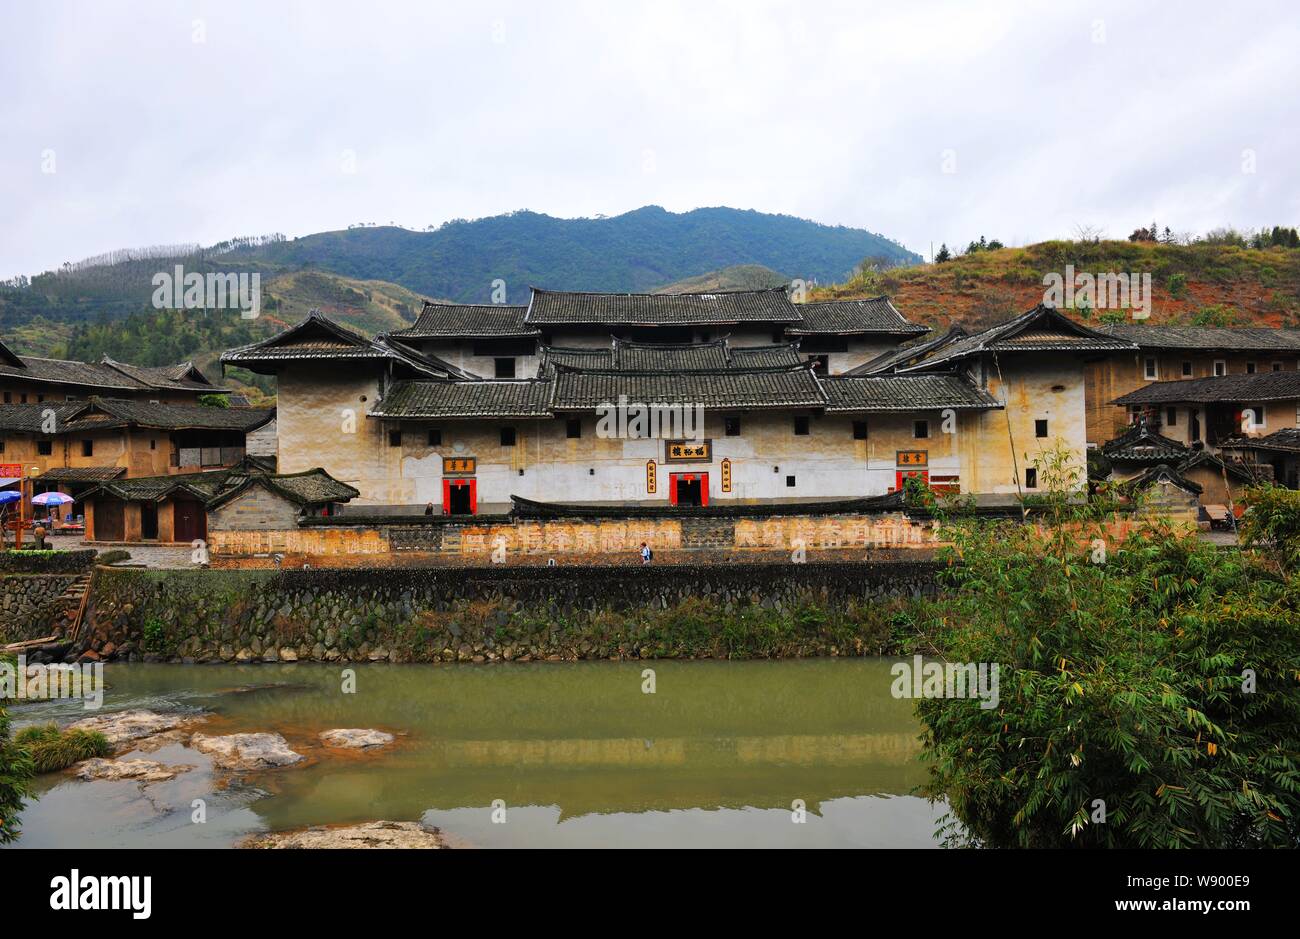 View of tulous or earthen buildings in Yongding county, southeast Chinas Fujian province, 2 March 2012. Stock Photo